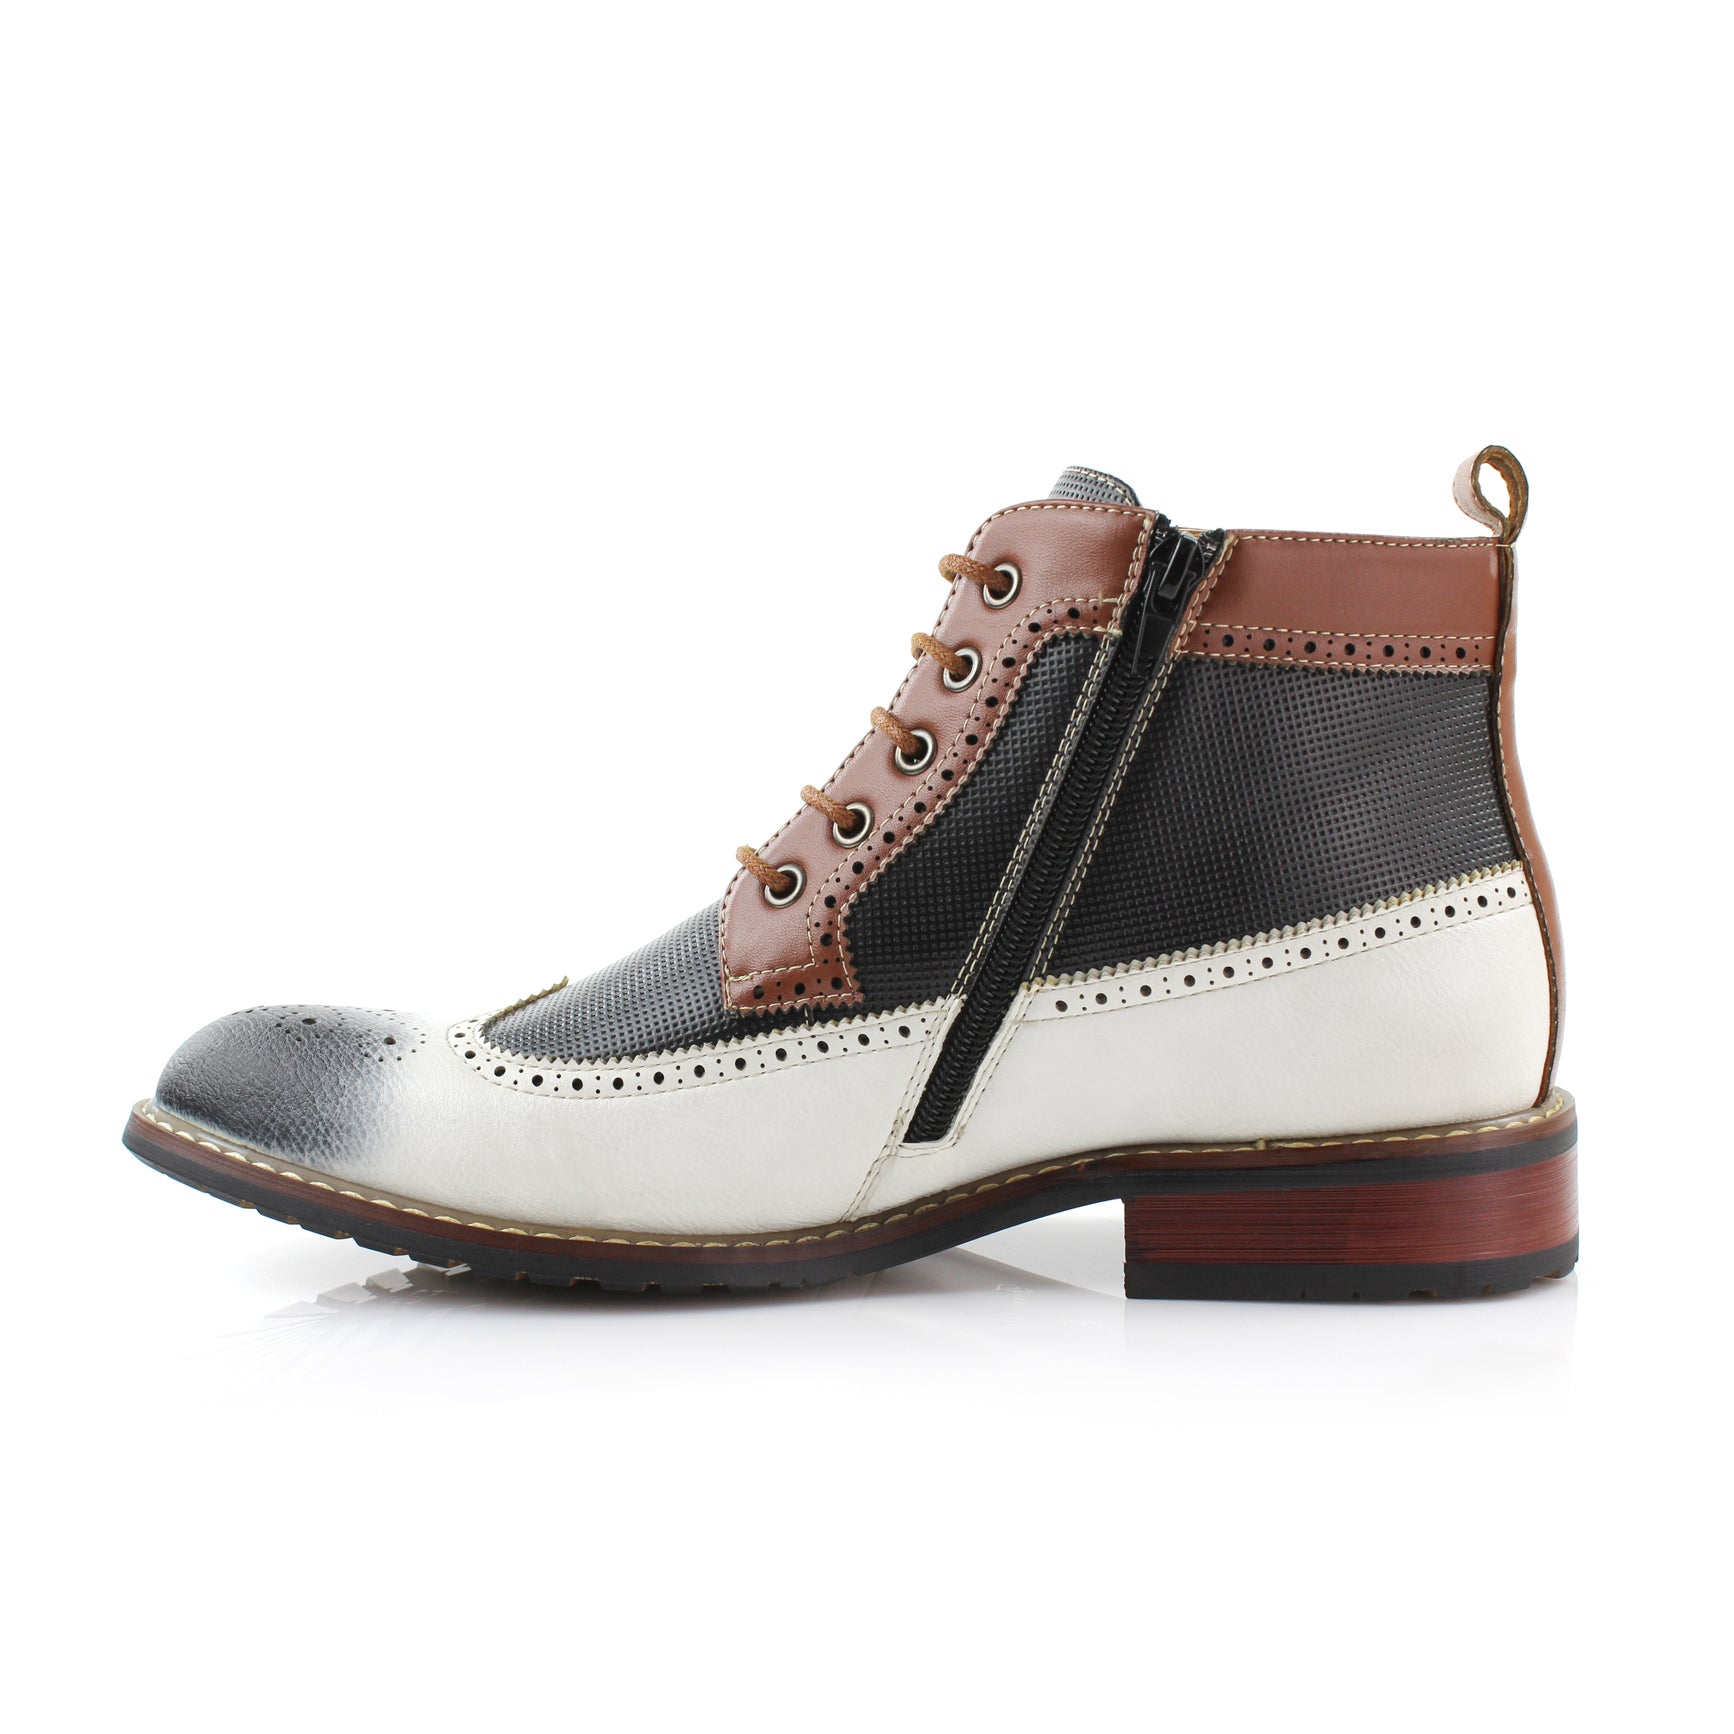 Two-Toned Brogue Wingtip Boots | Michael by Ferro Aldo | Conal Footwear | Inner Side Angle View